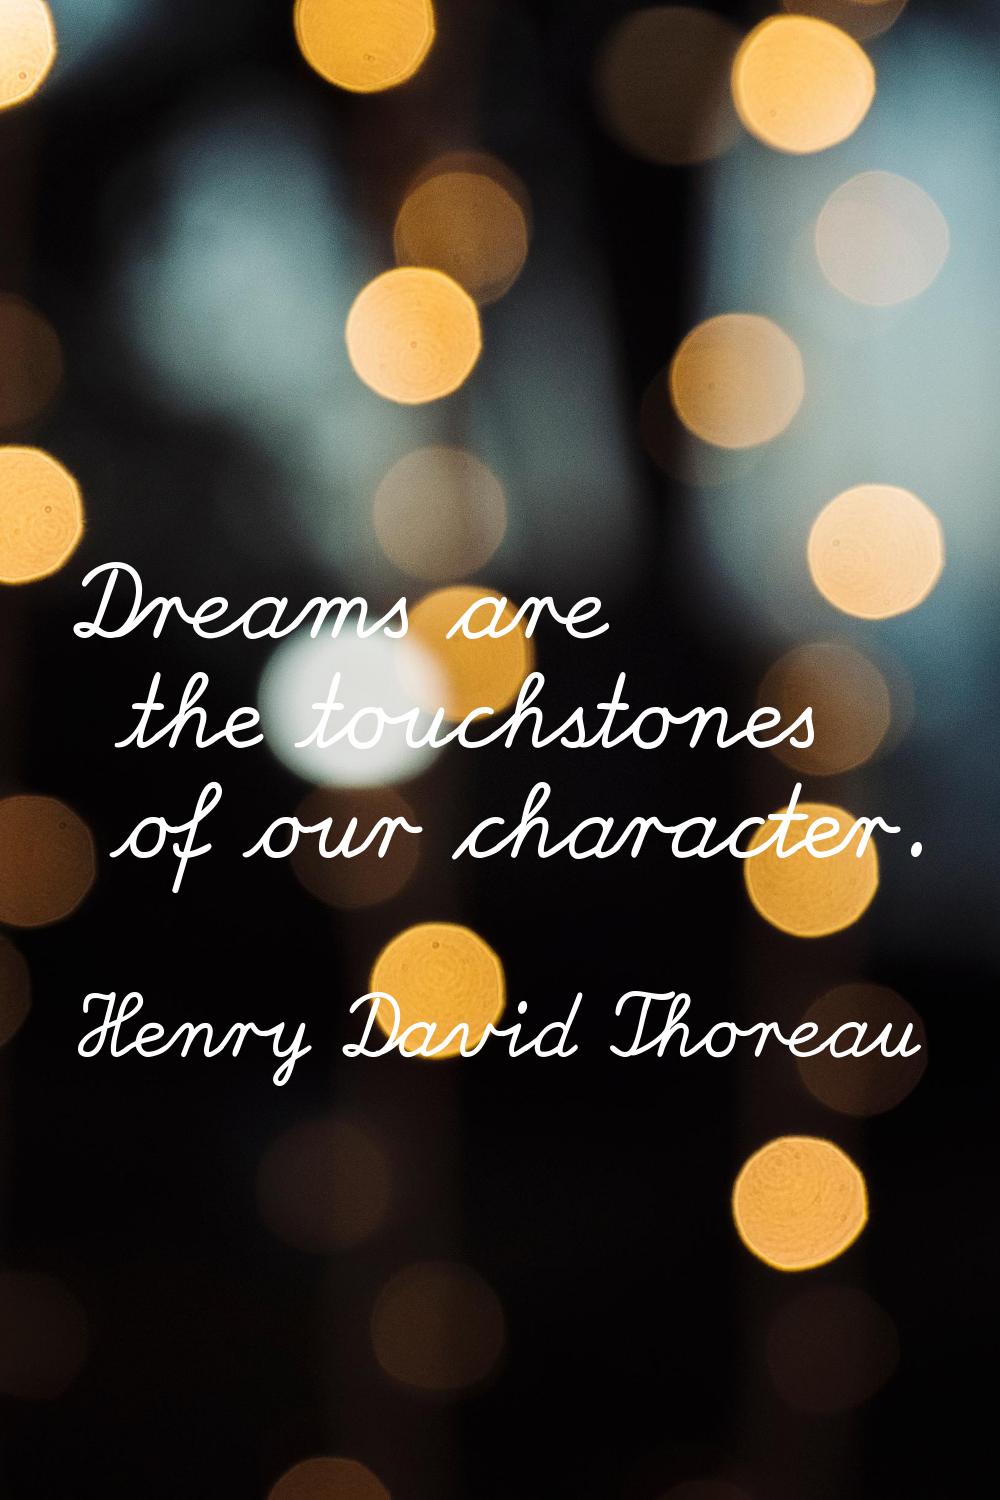 Dreams are the touchstones of our character.